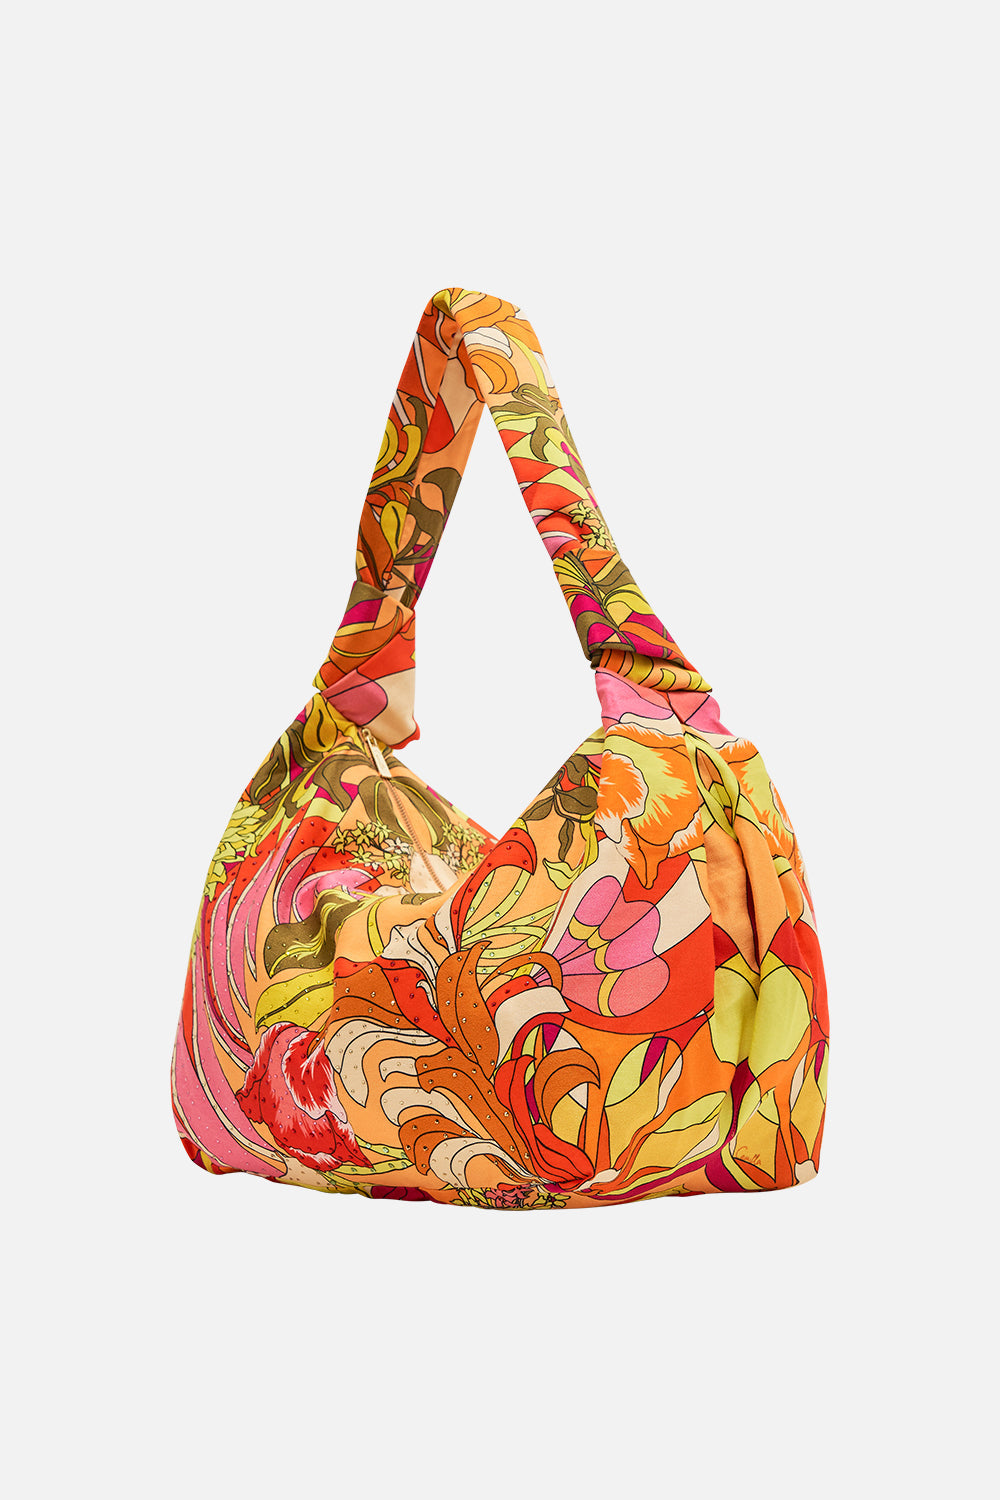 CAMILLA floral slouch shoulder bag in The Flower Child Society